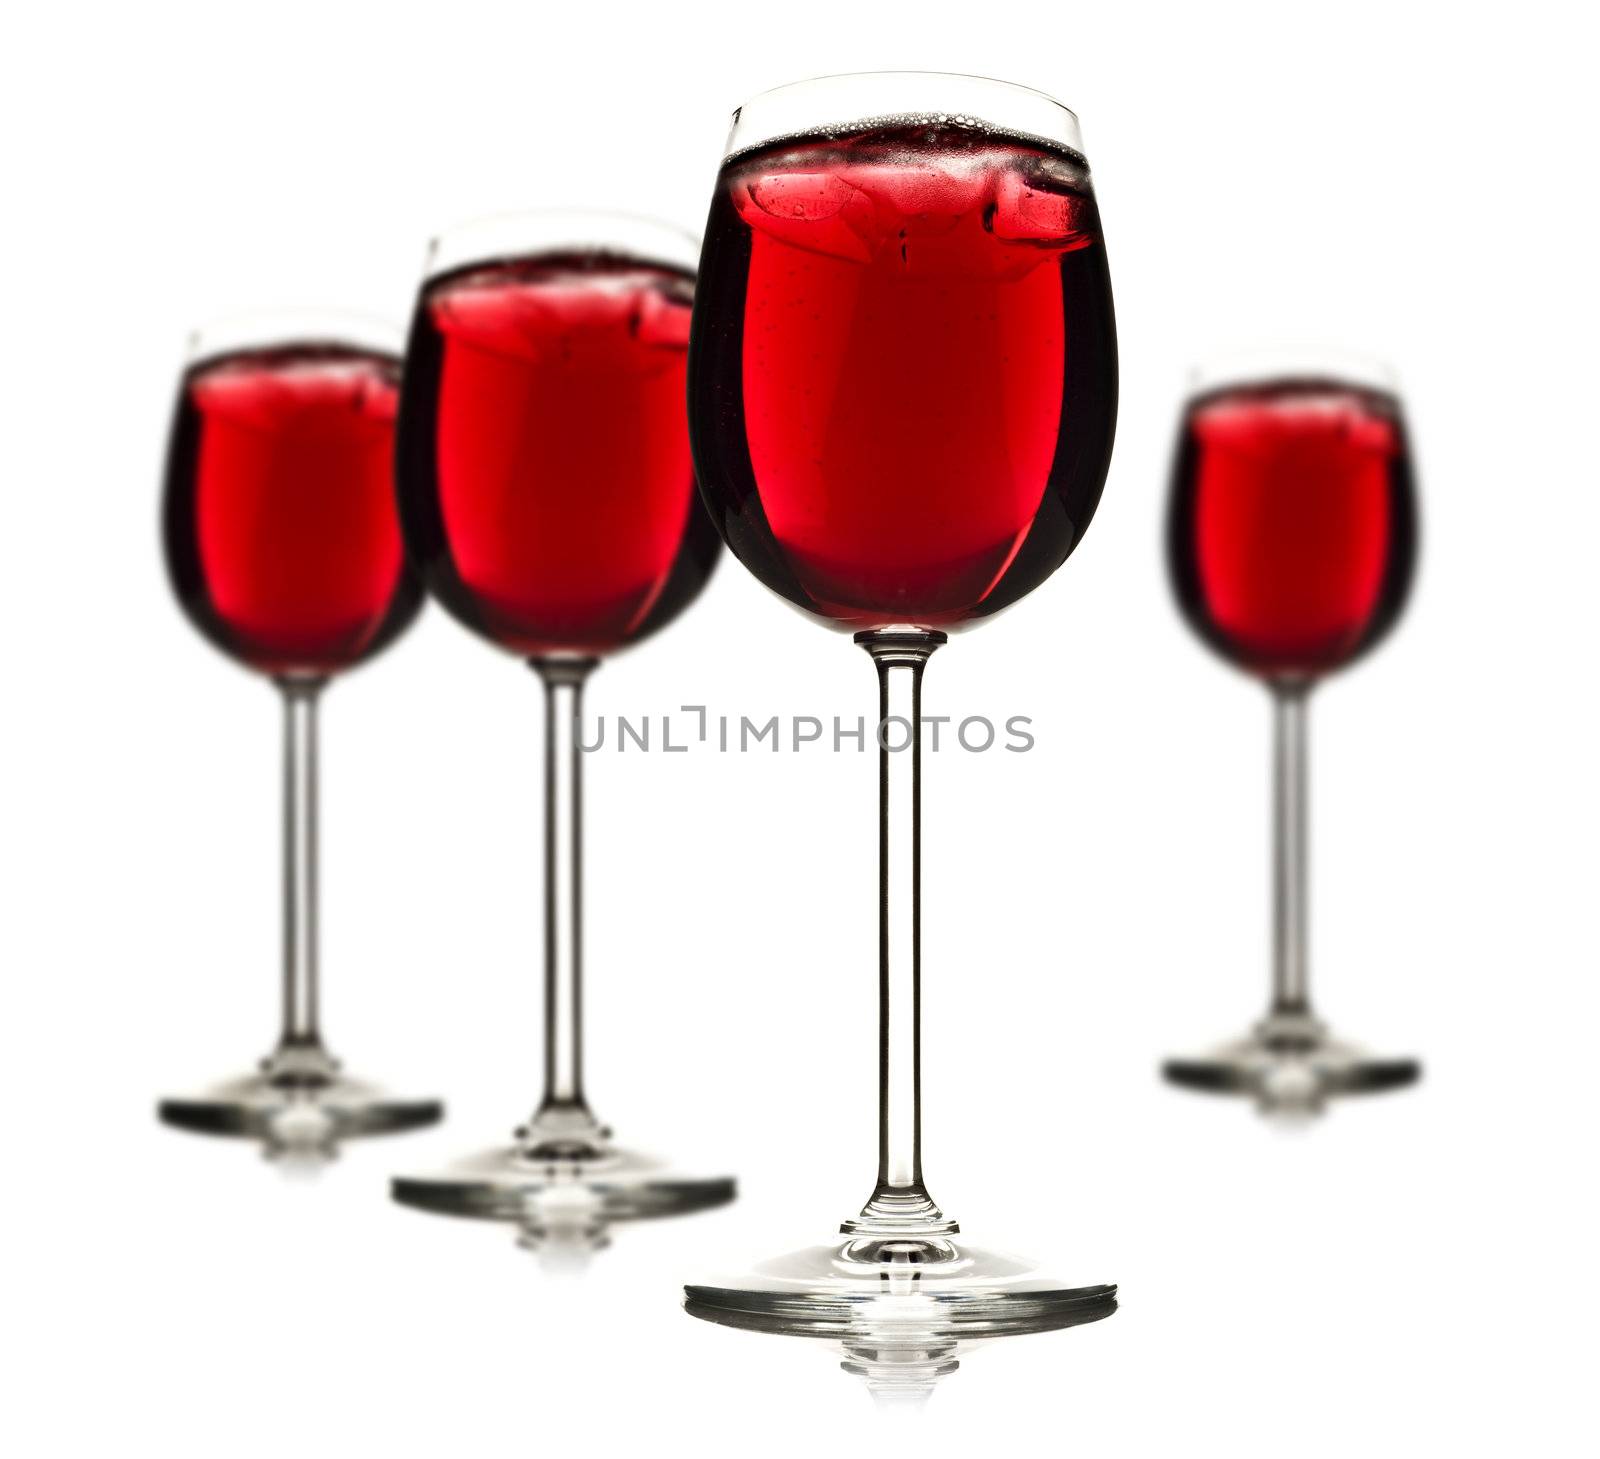 Four wine glasses with red fruit juice and ice on a white background